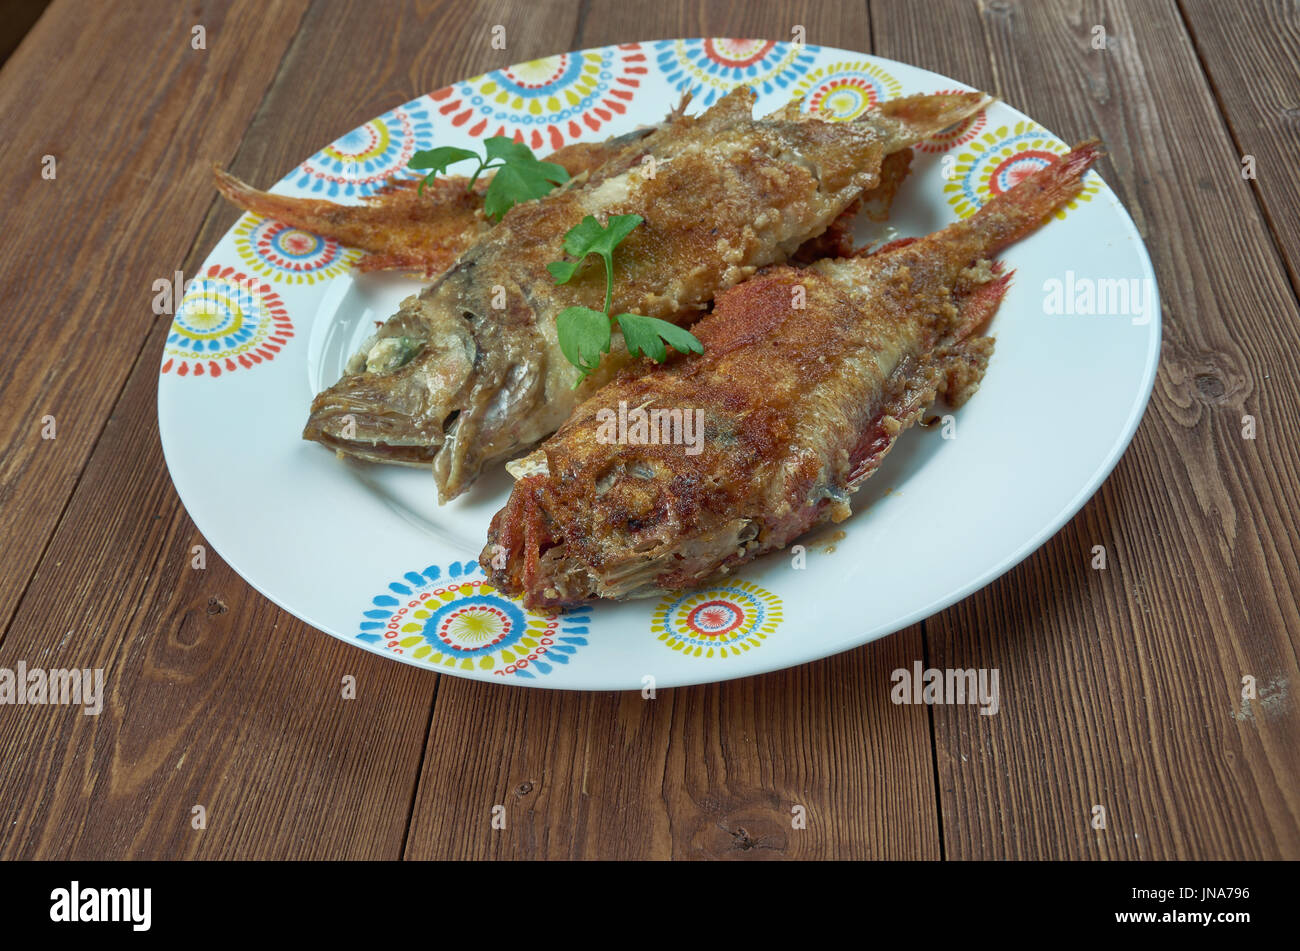 Salmonetes con fritura Andaluza. Fried in a frying pan fish, Spanish cuisine Stock Photo